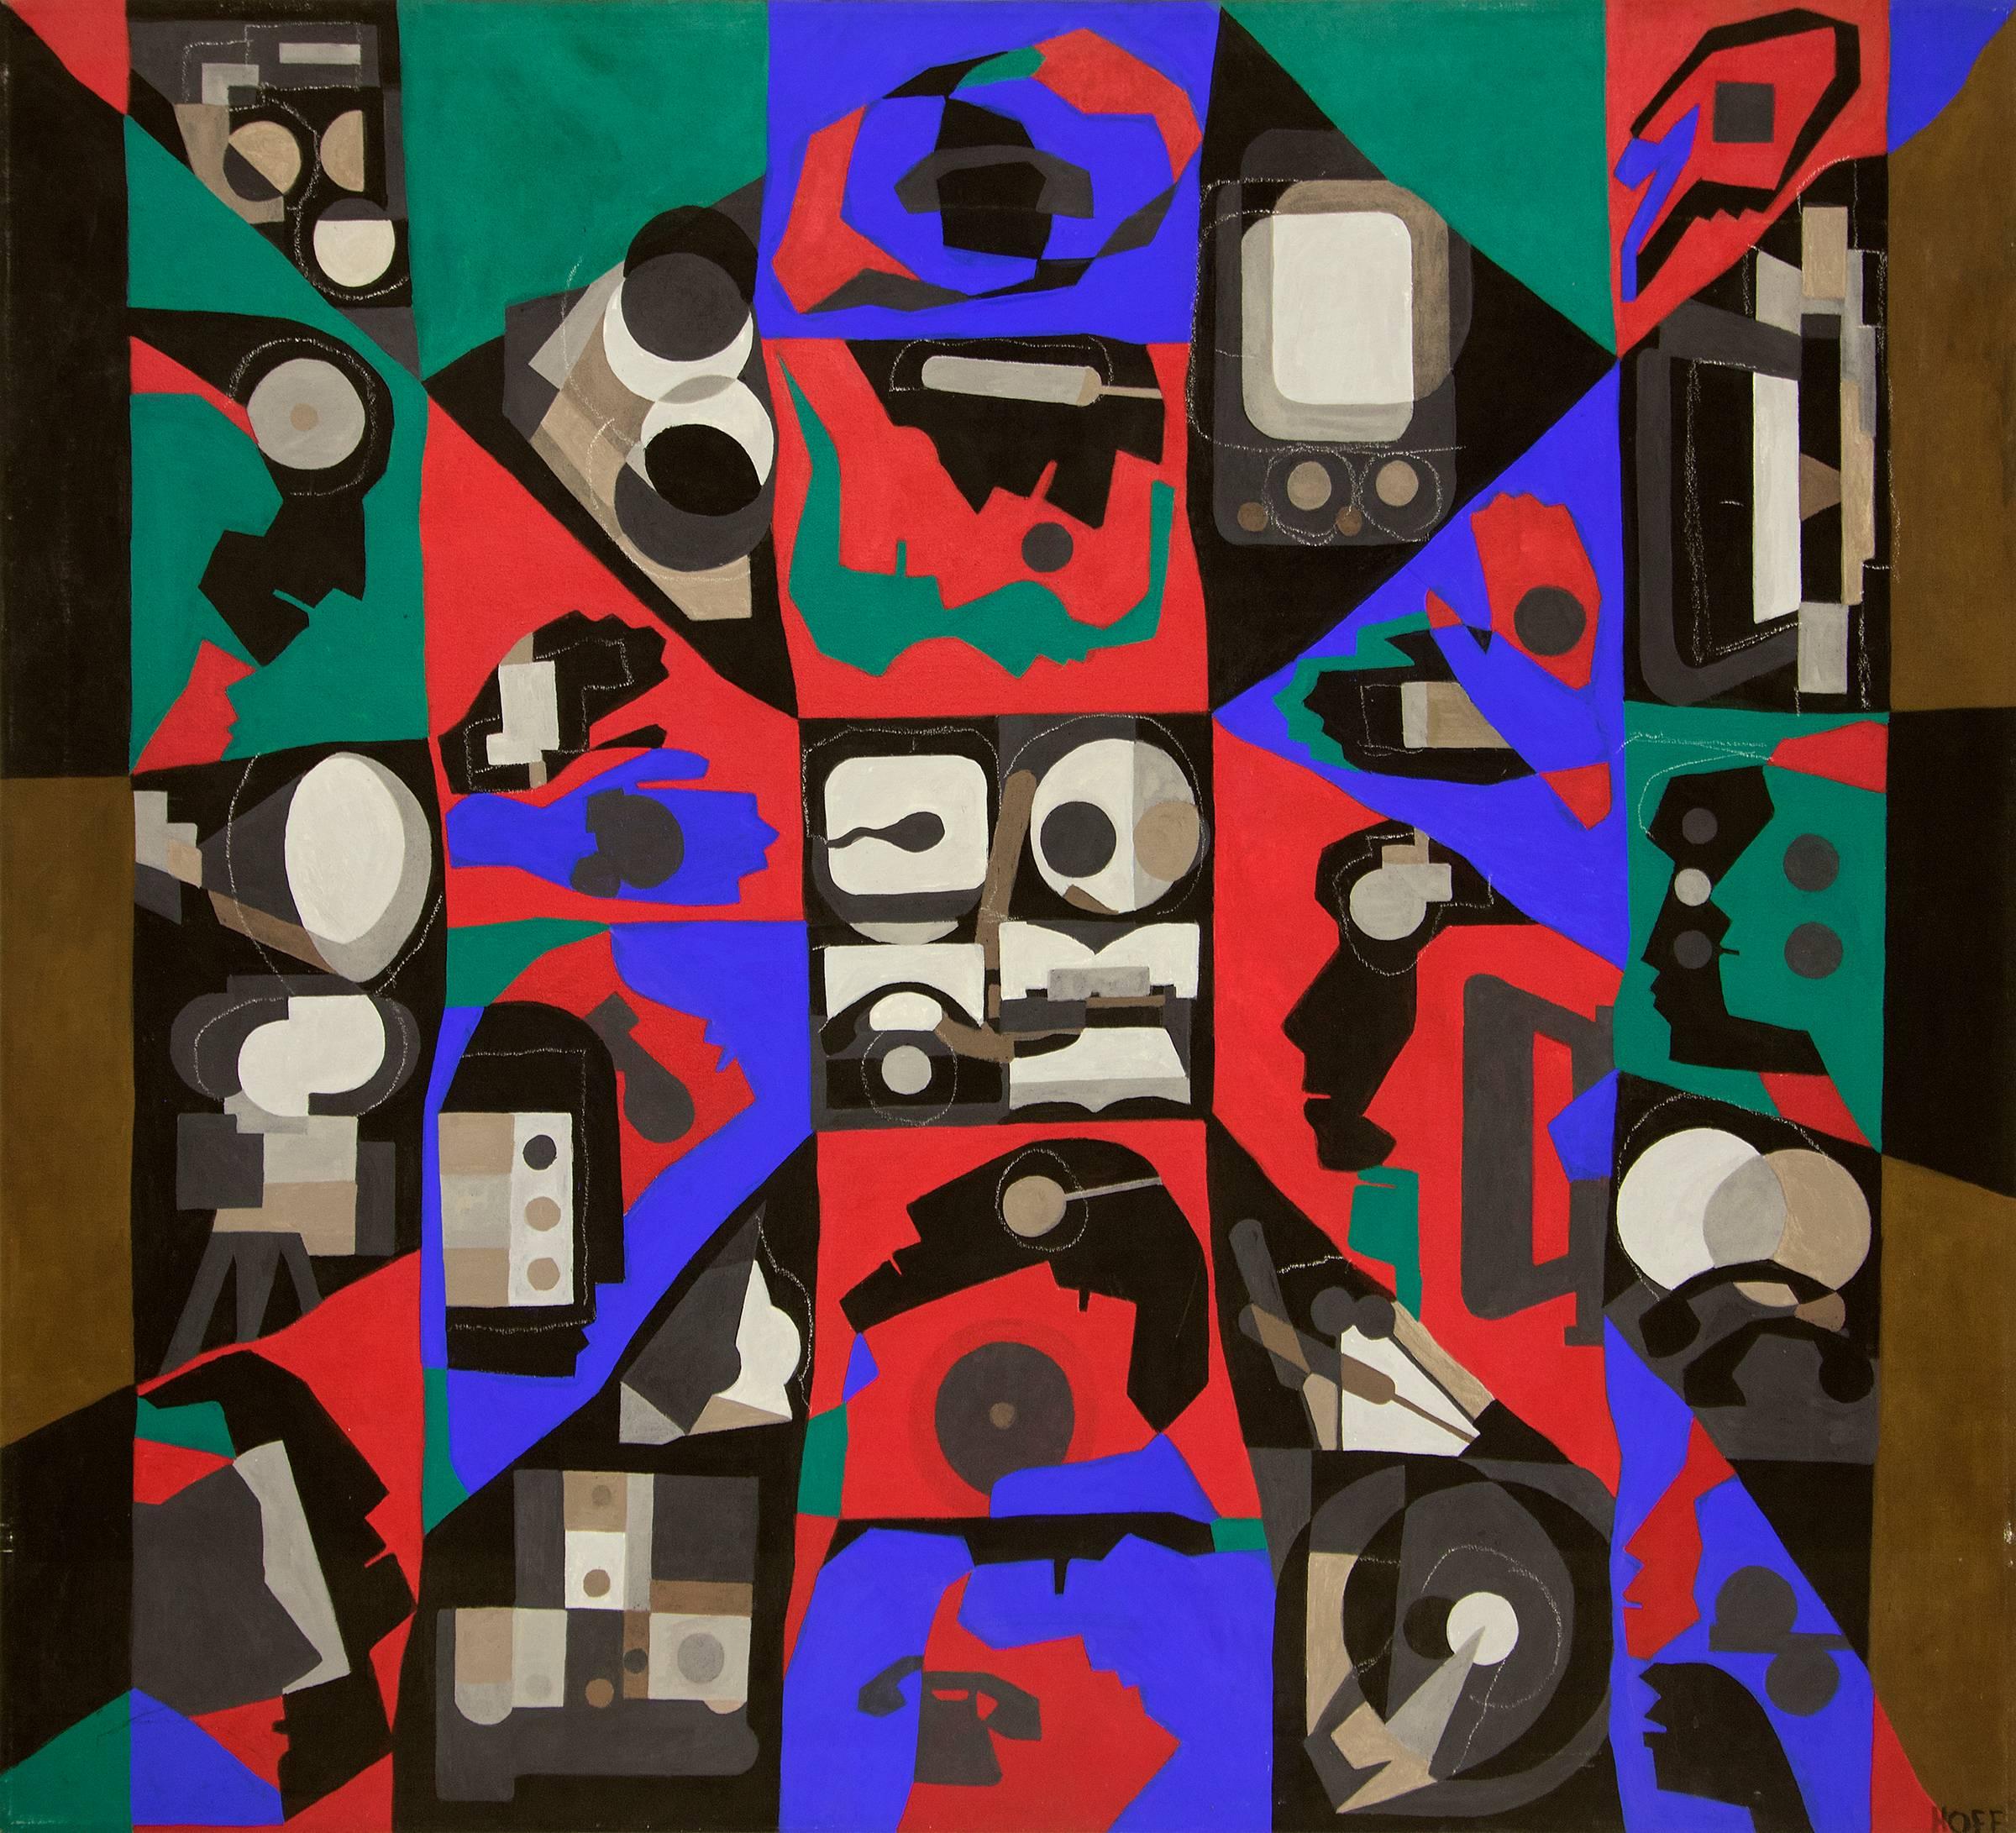 Abstract acrylic and fabric collage on canvas in purple, red, green, brown and black, signed by Margo Hoff (1910-2008) painted 1974. Unframed, wrapped canvas measuring 54 x 60 x 3⁄4 inches. 

Provenance: Estate of the artist, Margo Hoff

Painting is